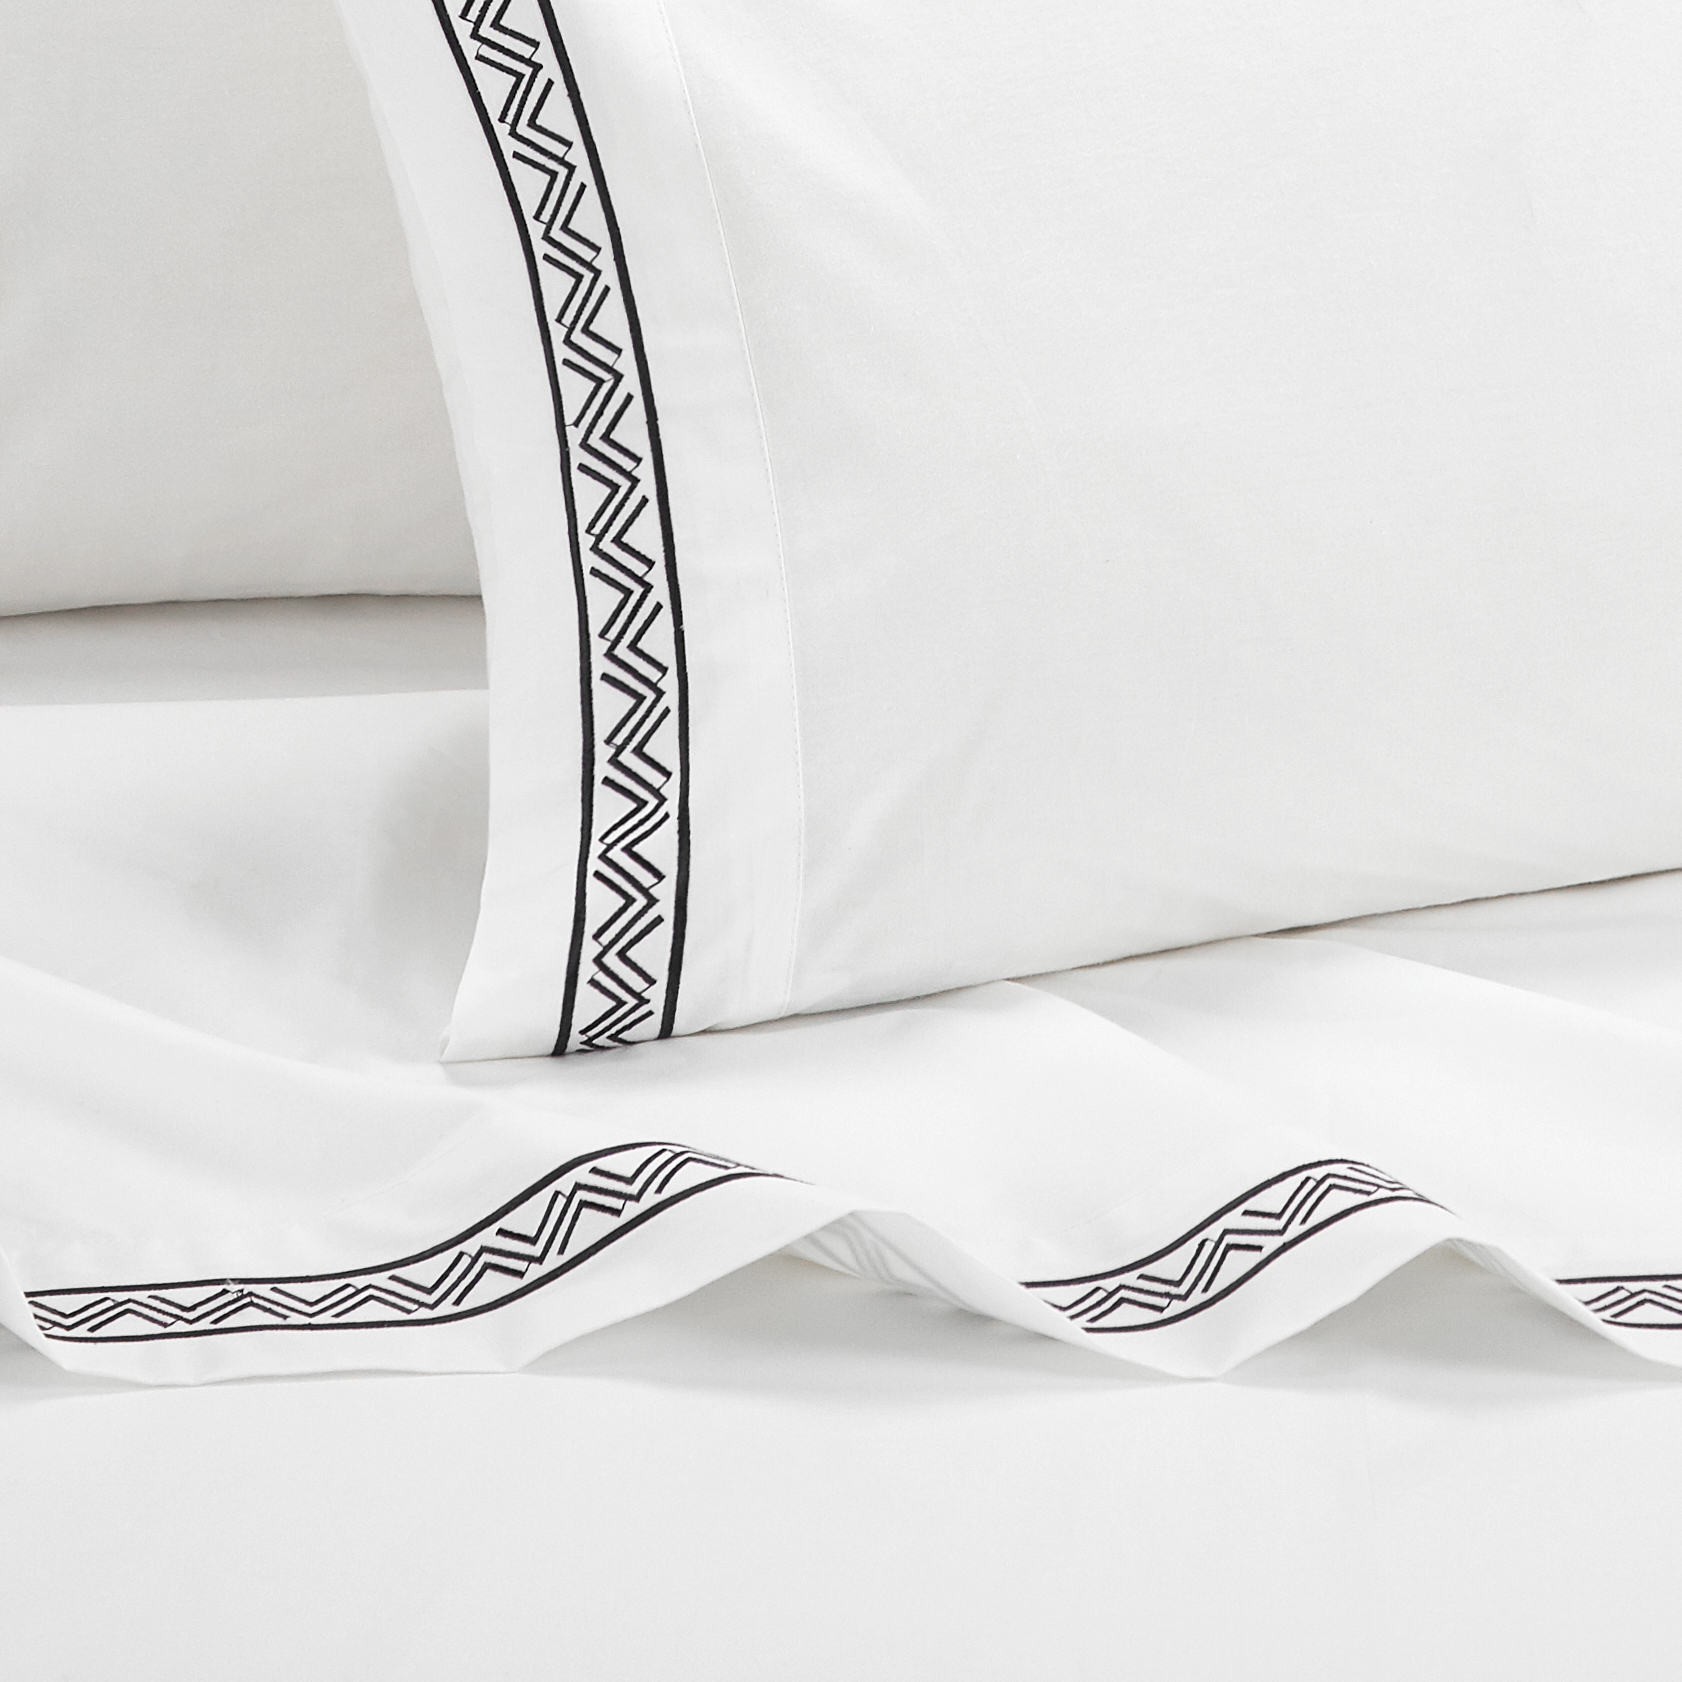 4 Piece Orden Organic Cotton Sheet Set Solid White With Dual Stripe Embroidery - Beige, Queen